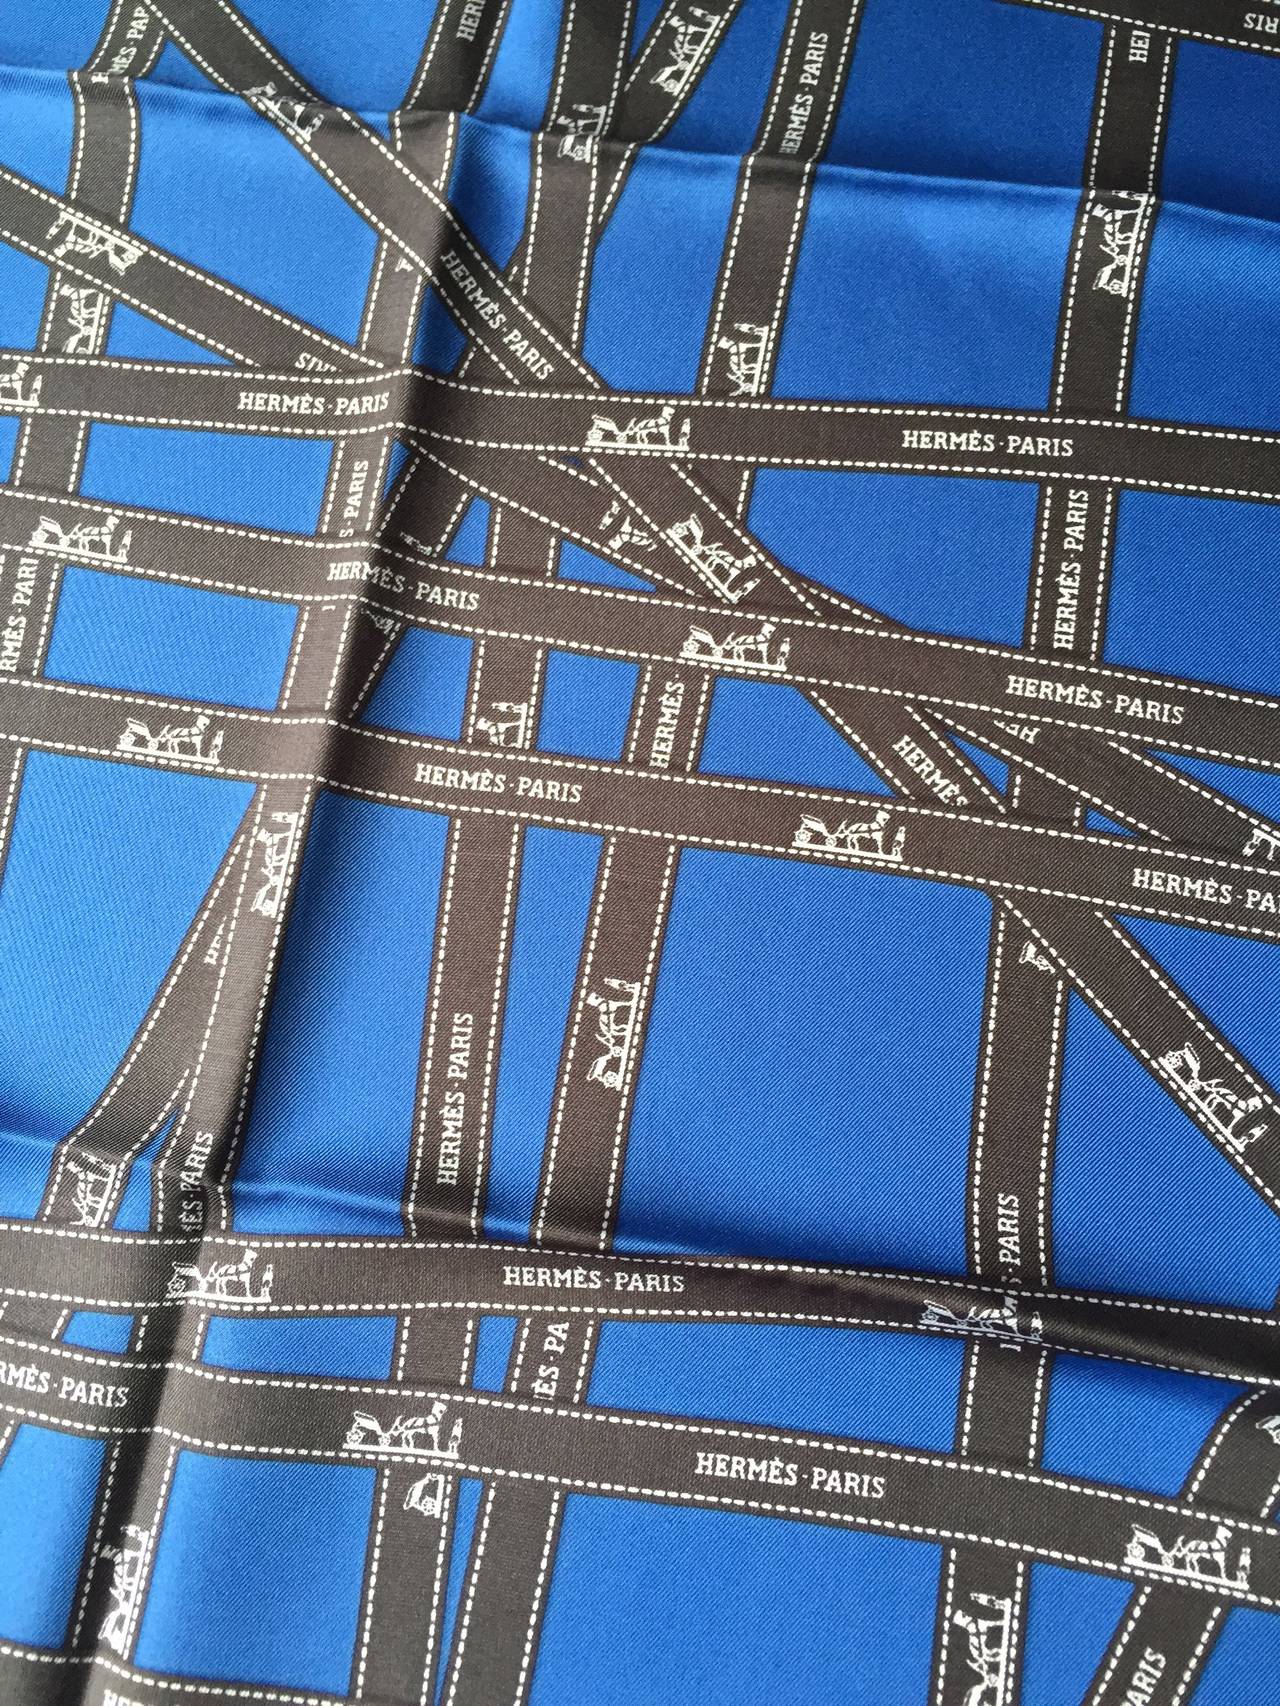 Hermes Scarf BOLDUC
 
Hermès Paris Made In France
 
New condition
100% silk
 
Blues tones
 
Dimensions : 90 cms or 36 inches
Square
 
No box
 
All ours items are 100% Authentic and original. No fake or other awful imitations.
We are